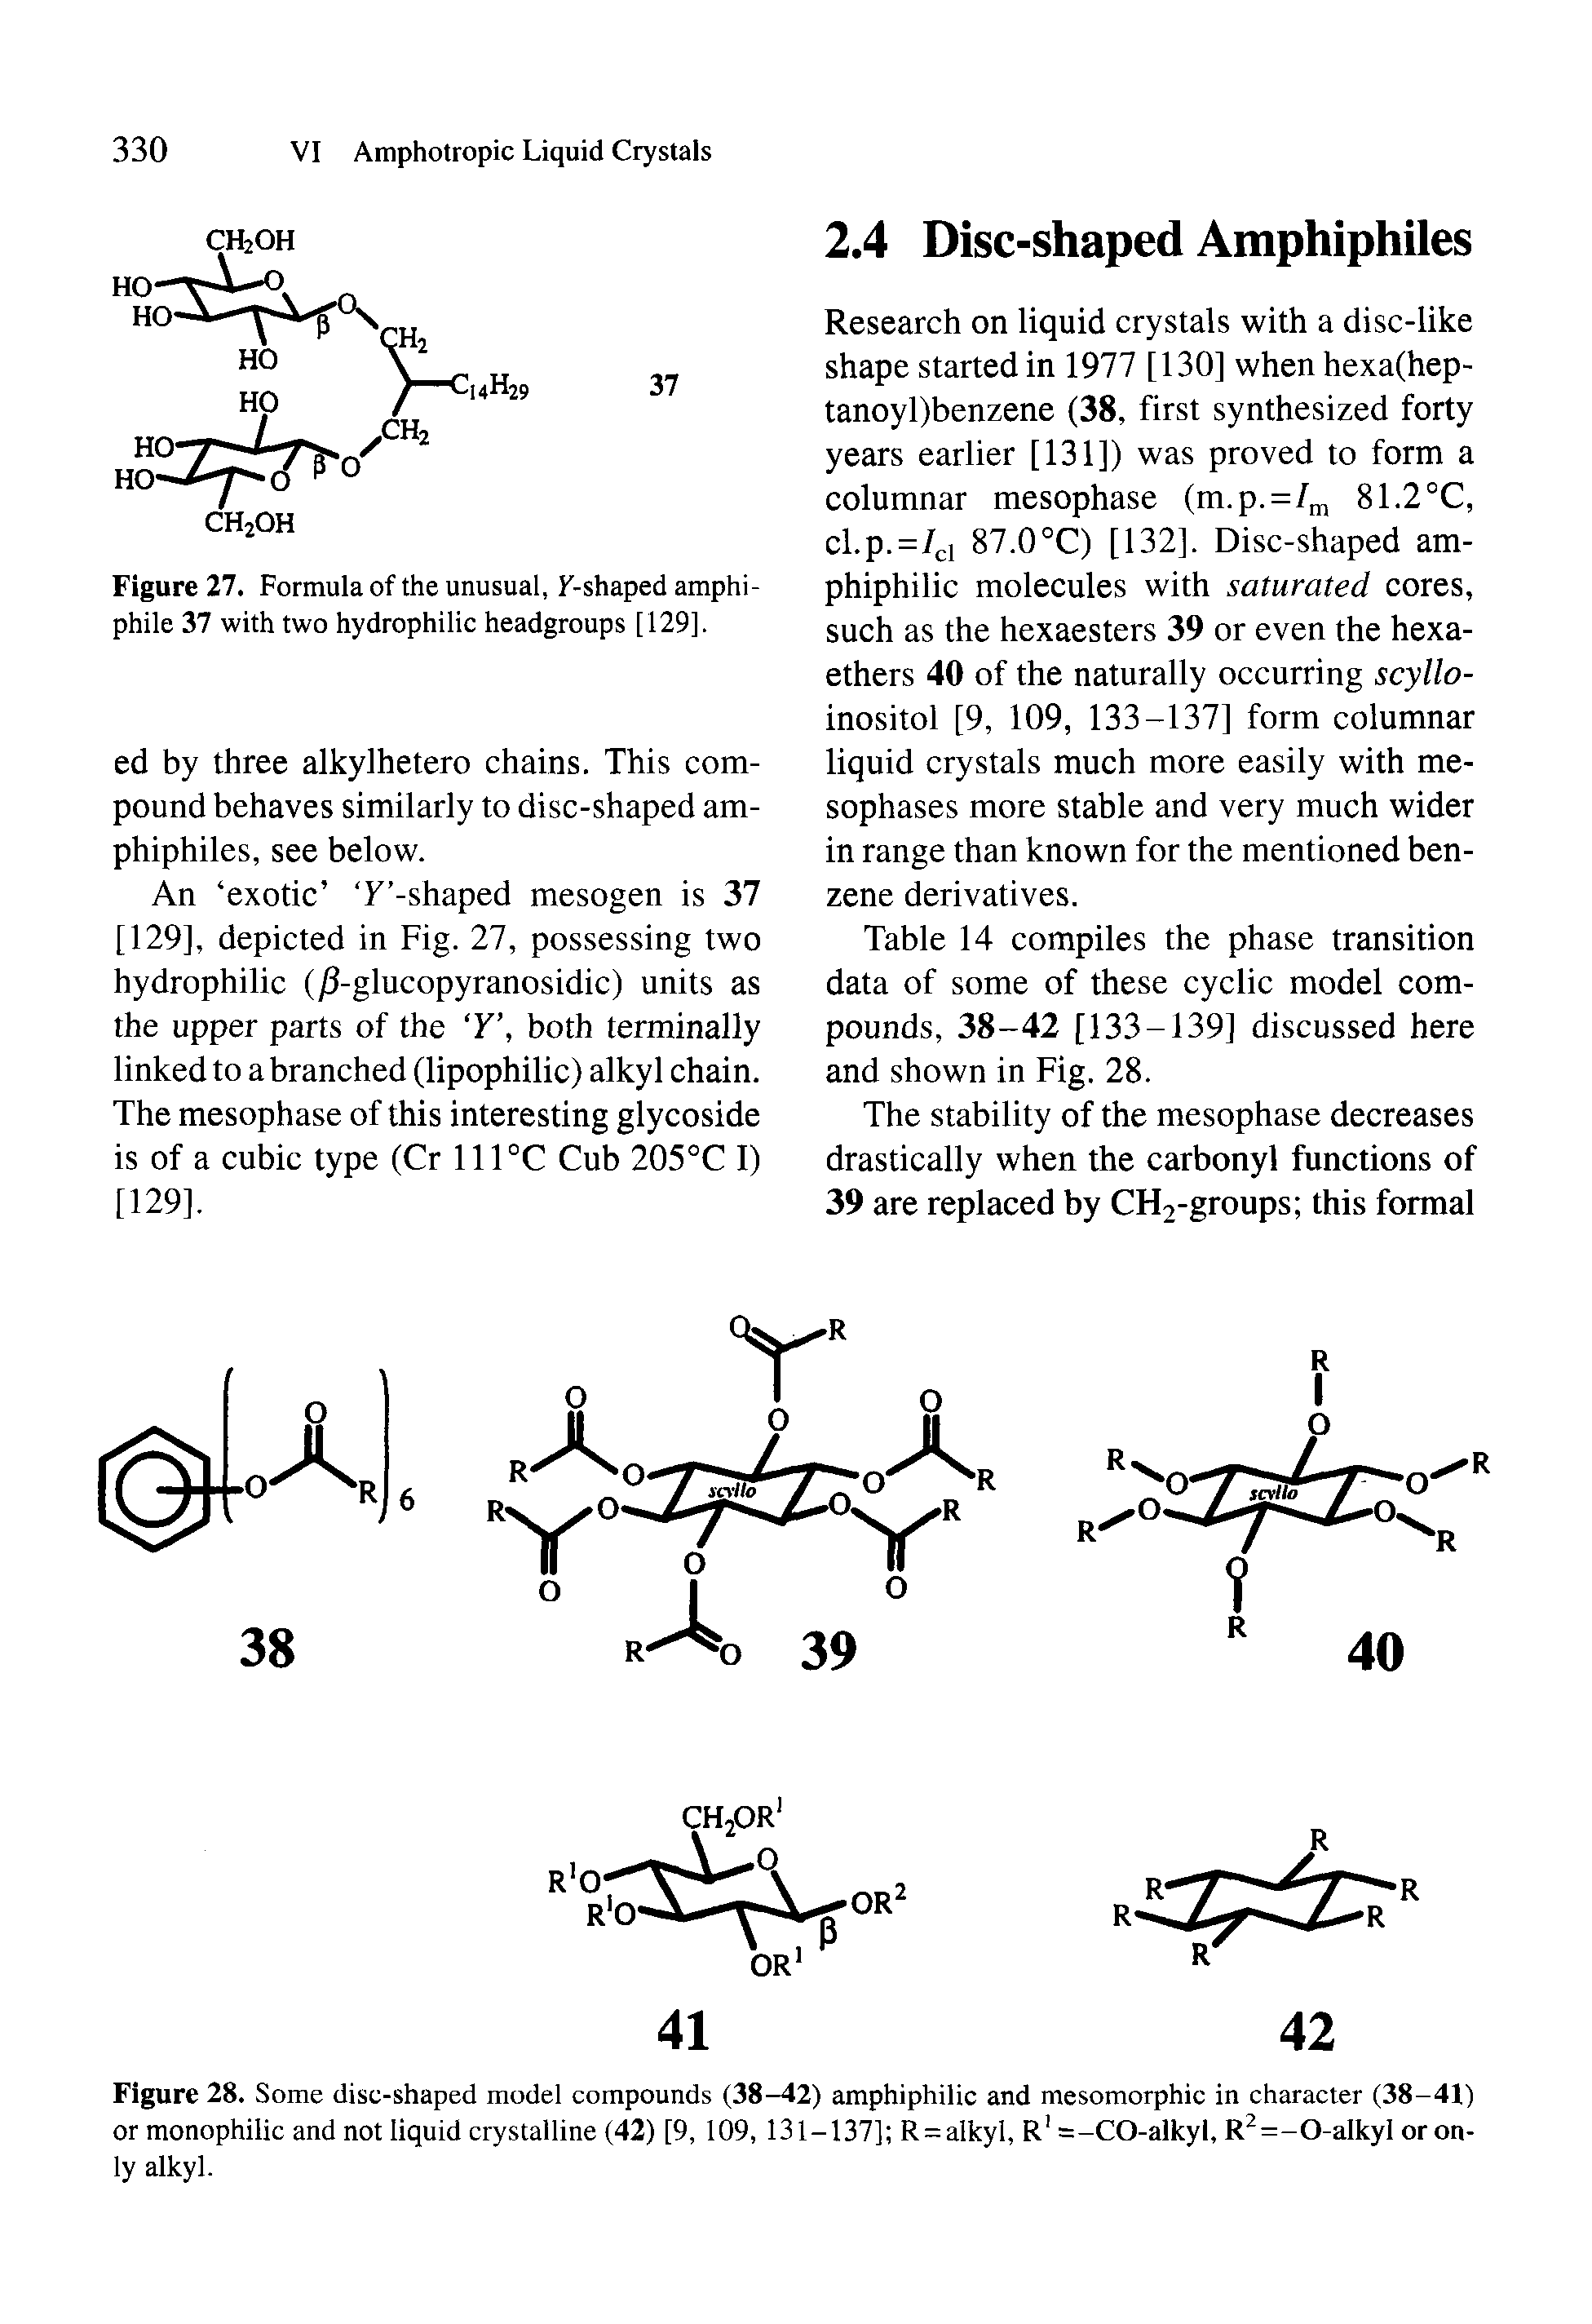 Figure 28. Some disc-shaped model compounds (38-42) amphiphilic and mesomorphic in character (38-41) or monophilic and not liquid crystalline (42) [9, 109, 131-137] R = alkyl, R =-CO-alkyl, R =-0-alkyl or only alkyl.